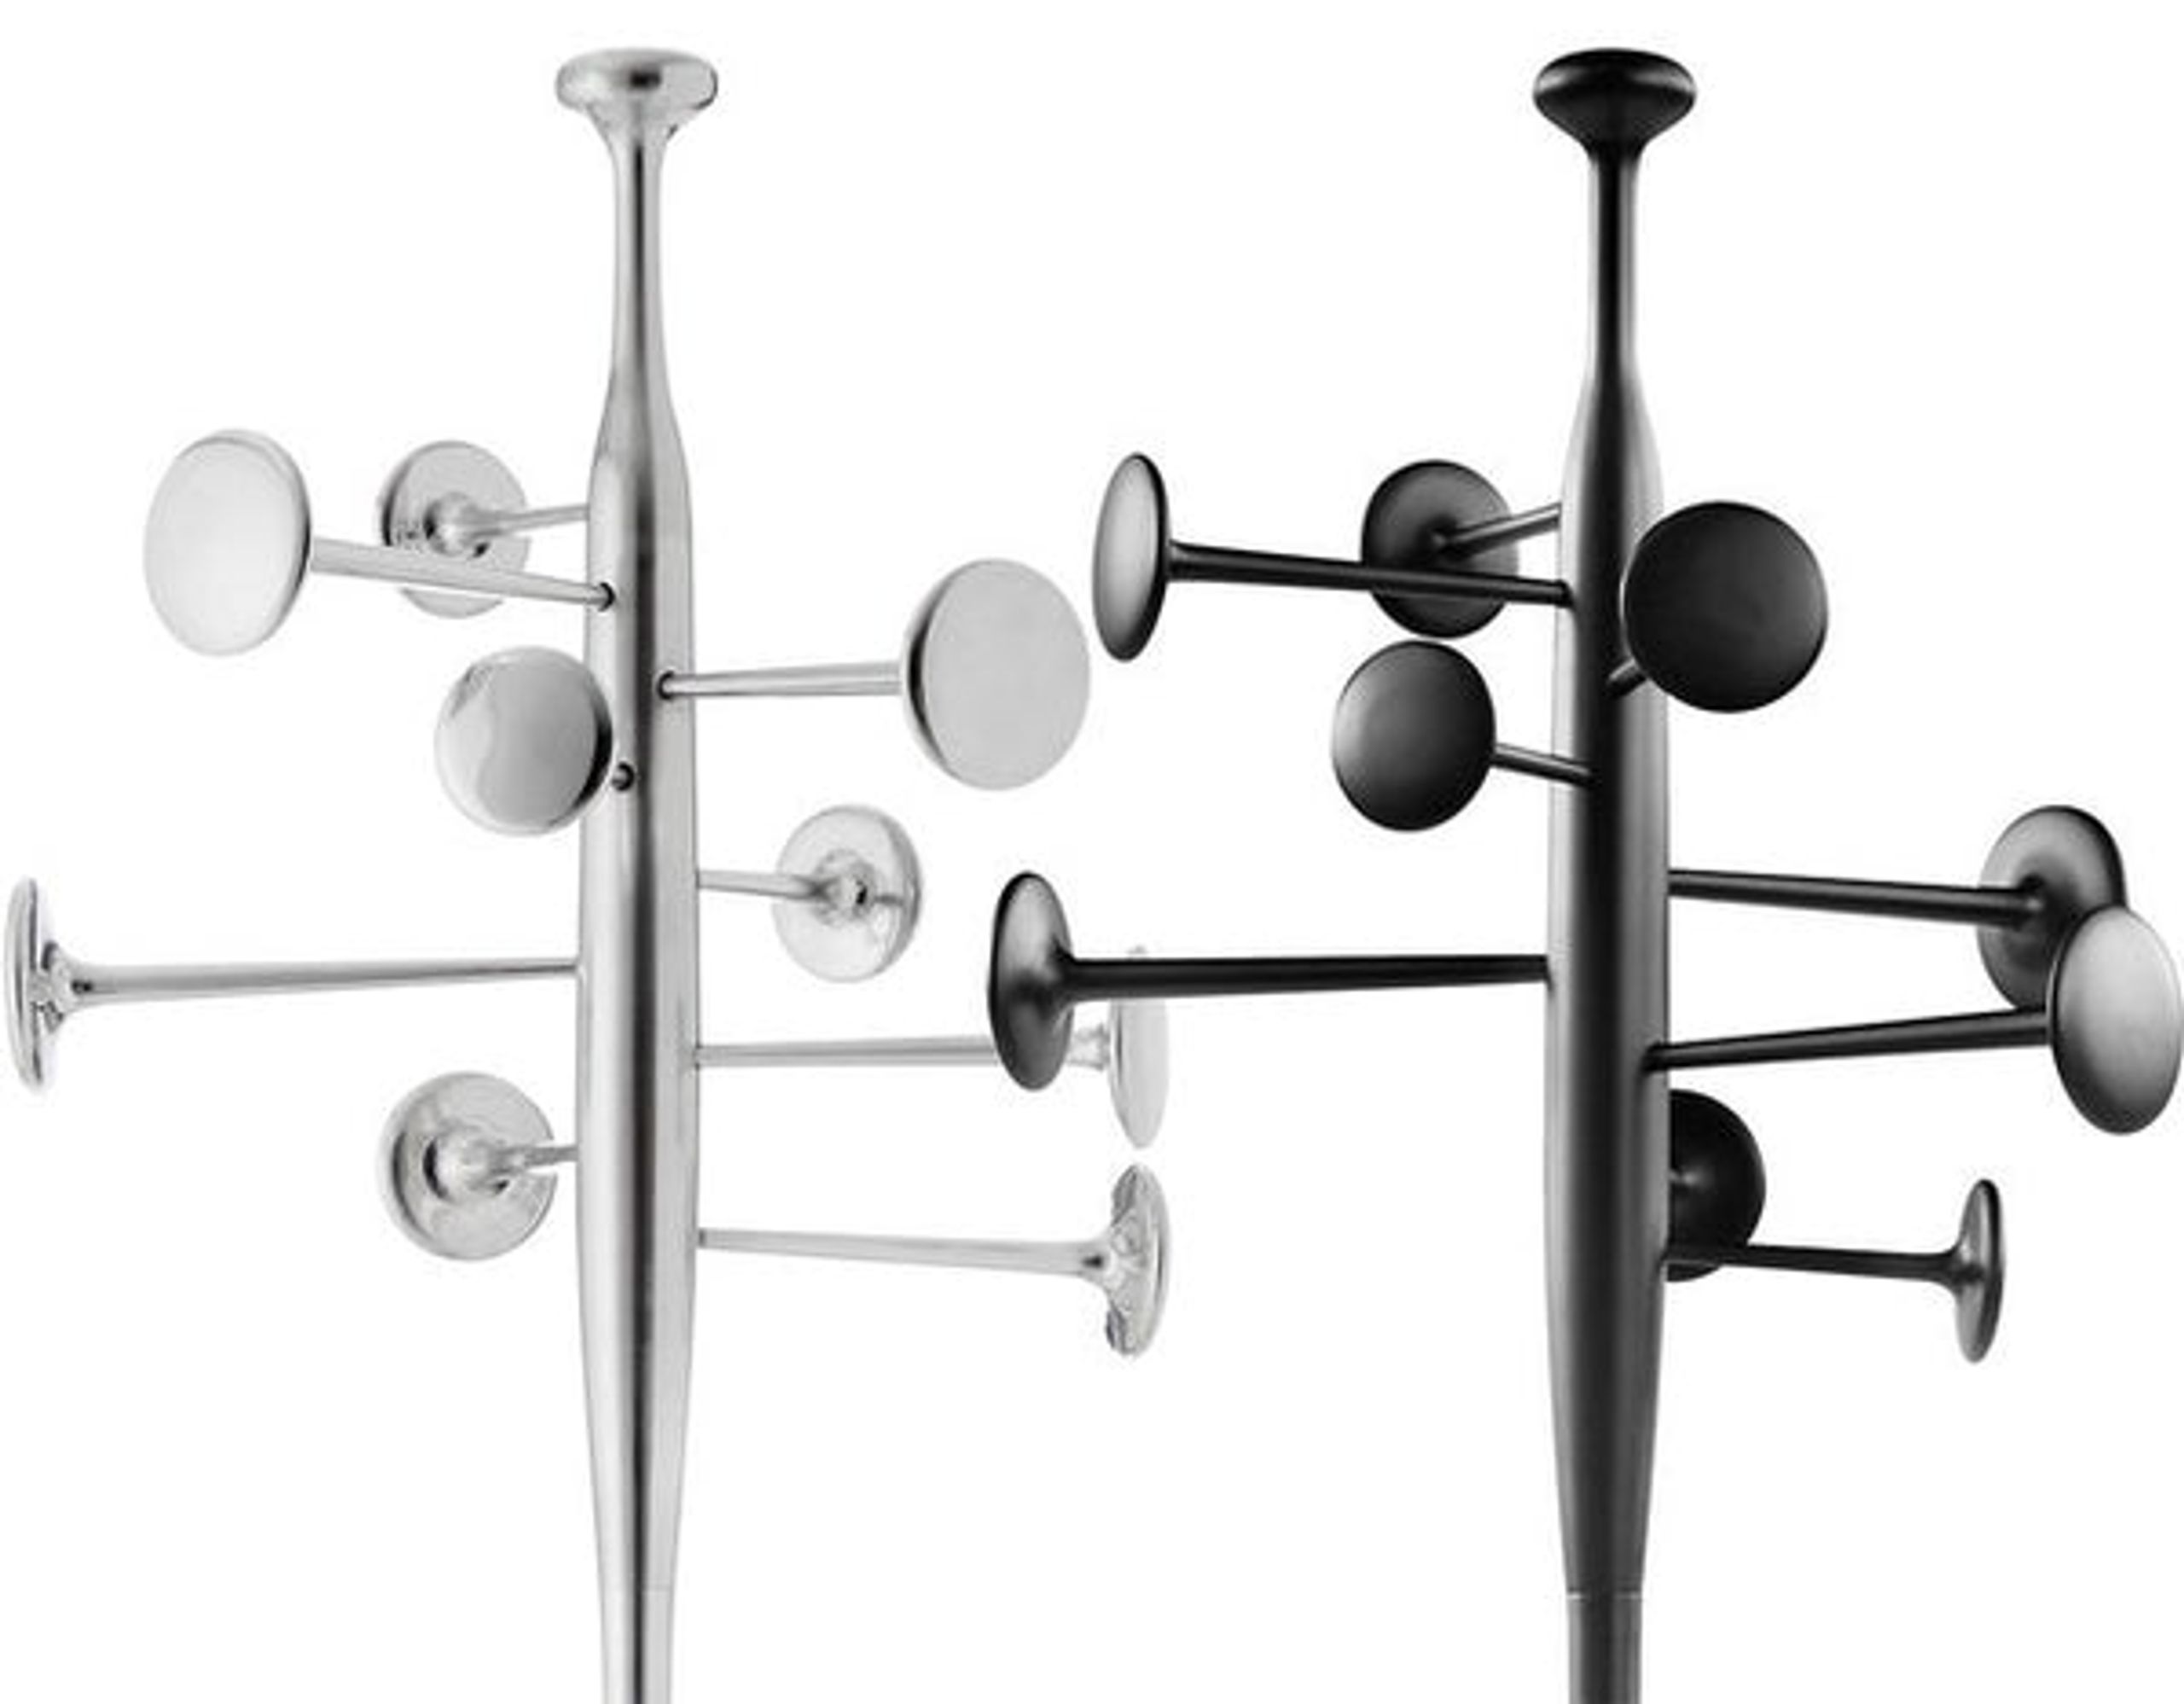 Mater - Stumtjener - Trumpet Coat Stand - Partly Recycled Aluminium